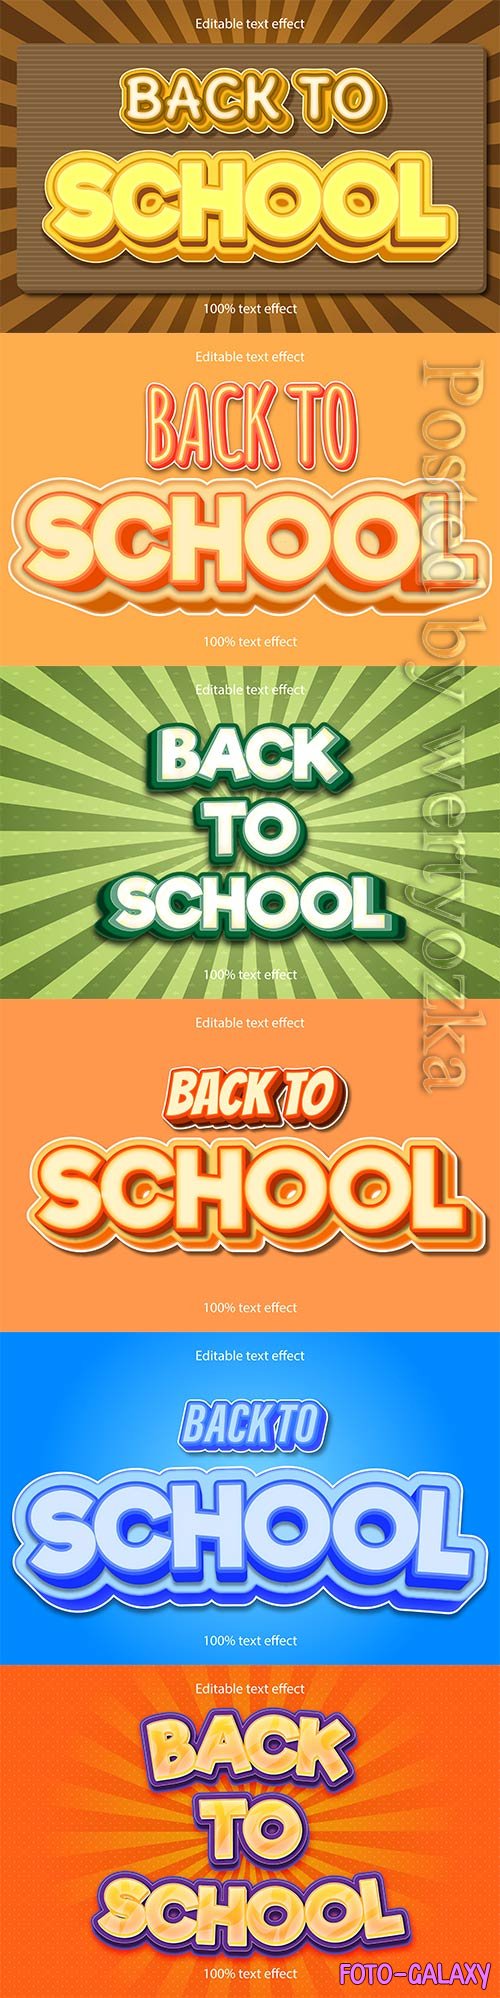 Back to school editable text effect vol 5